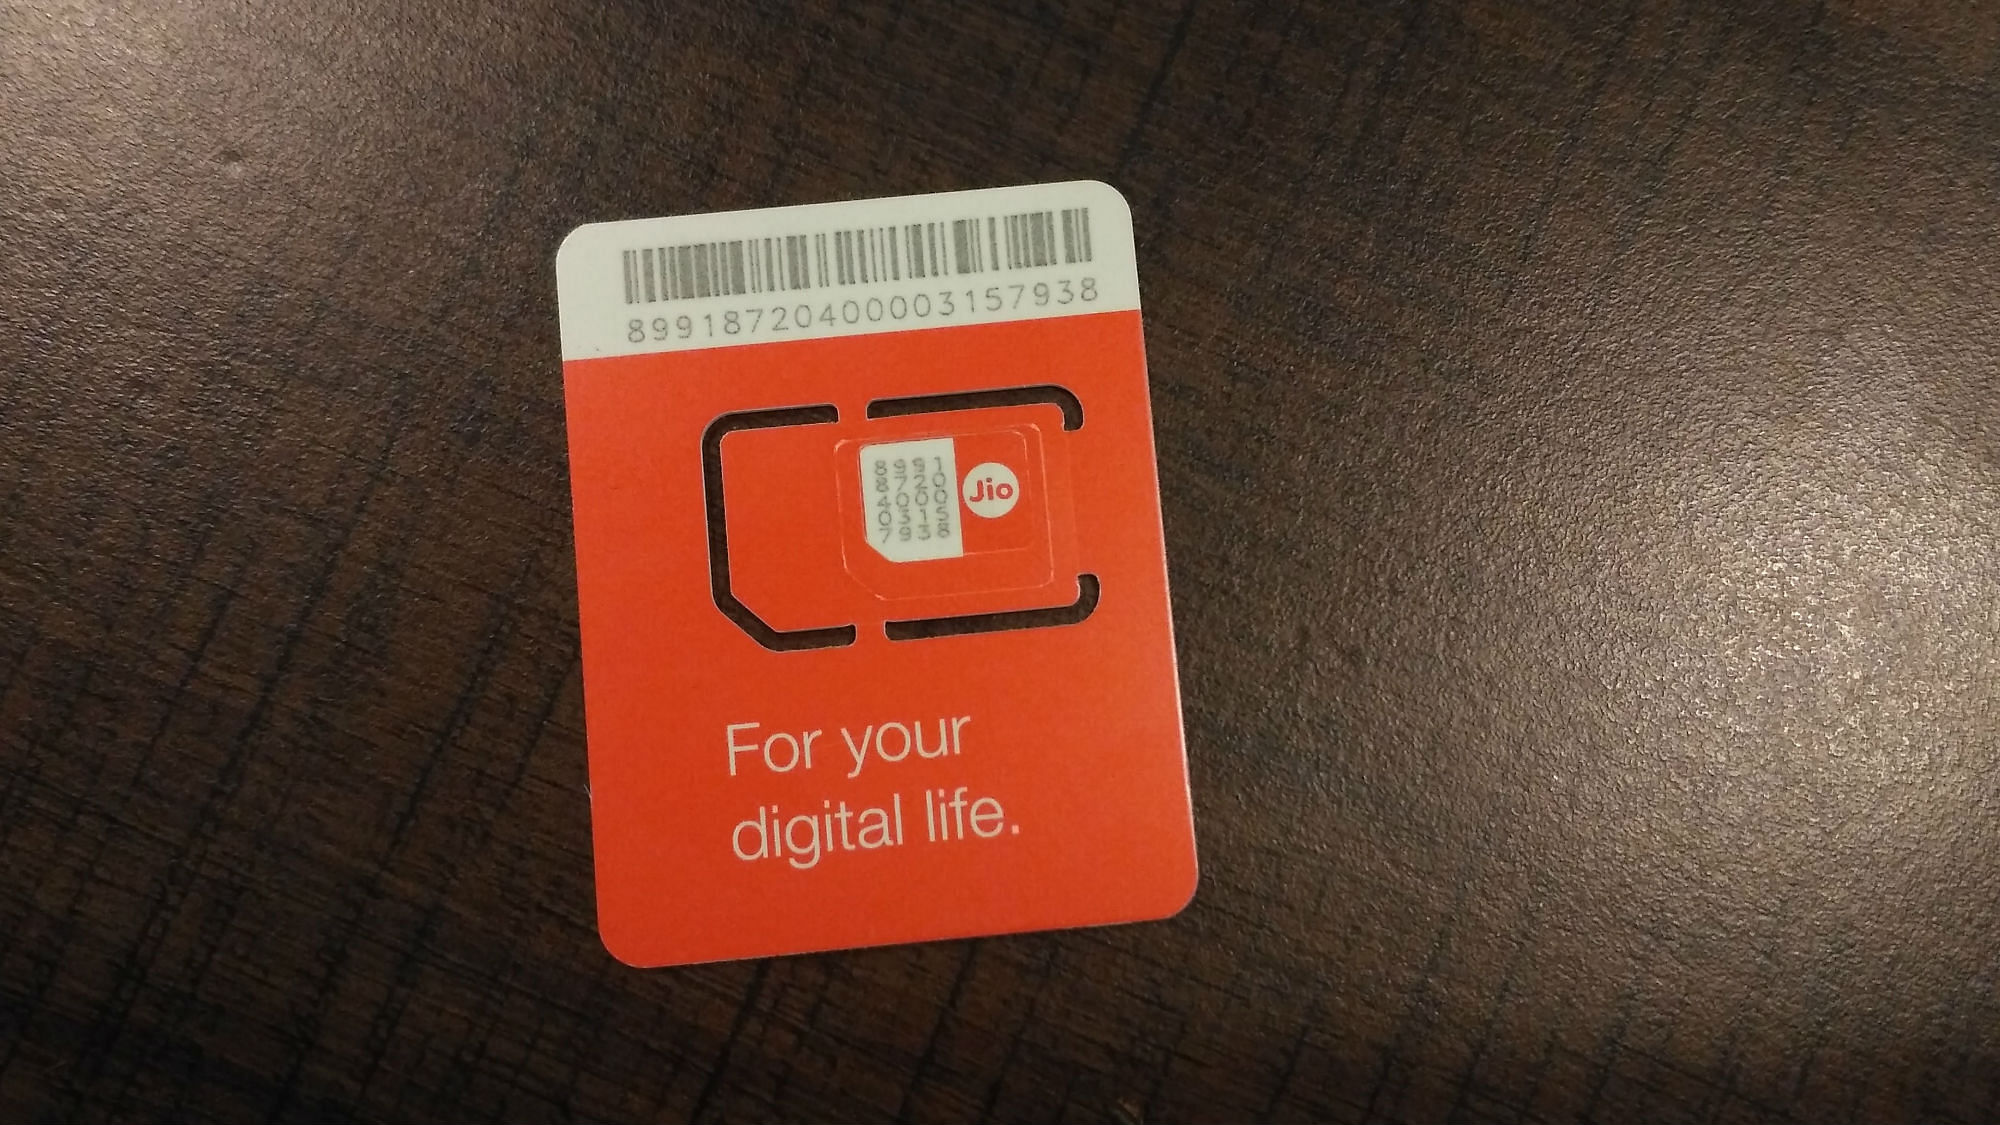 Reliance Jio 4G SIM will be available to all from September 5 onwards. (Photo: <b>The Quint</b>)